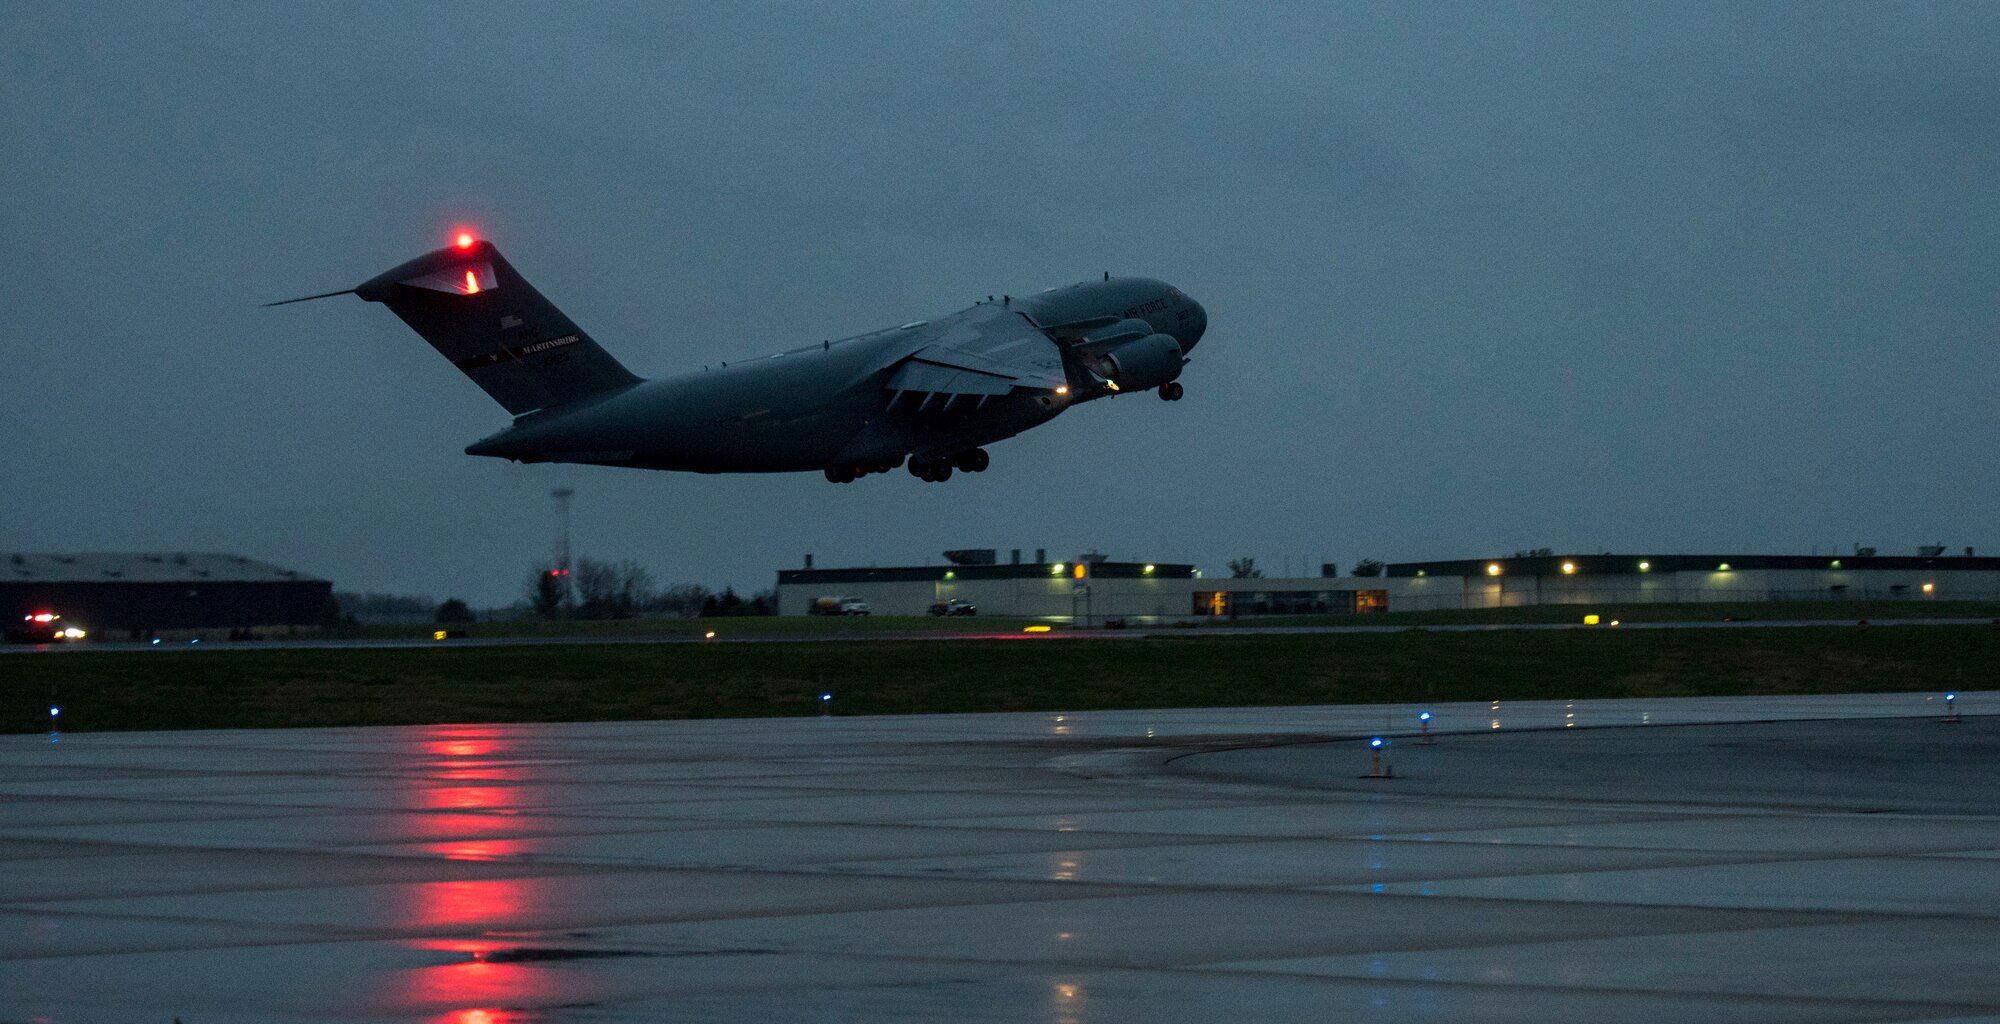 The 167th Airlift Wing transported just over 1 million COVID-19 test kits from Aviano Air Base, Italy to Memphis, Tenn., April 16, 2020. The test kits will be distributed throughout the nation.